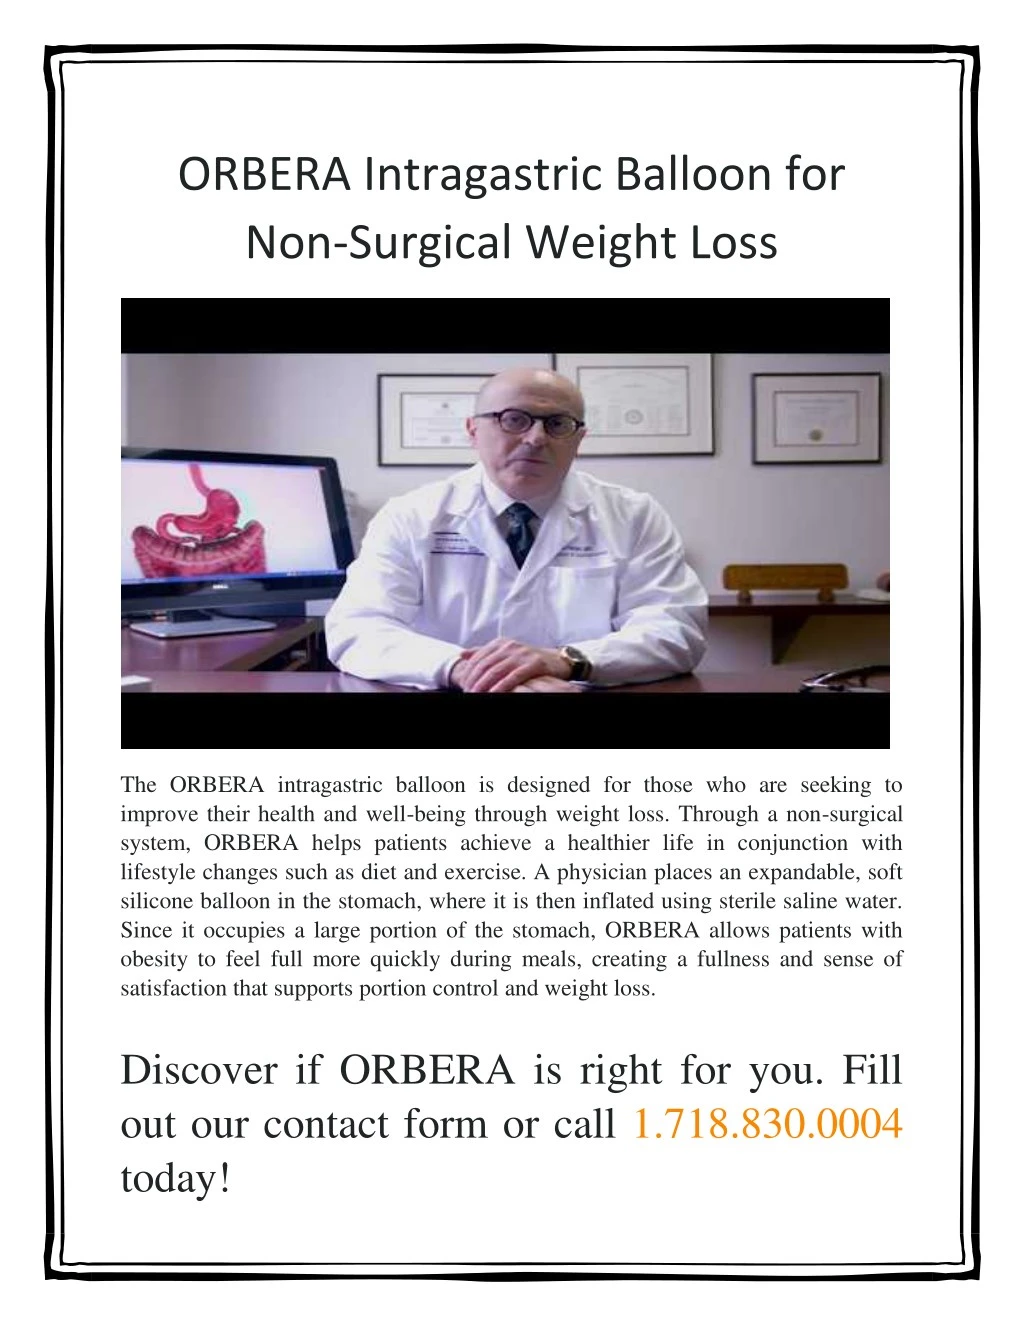 orbera intragastric balloon for non surgical